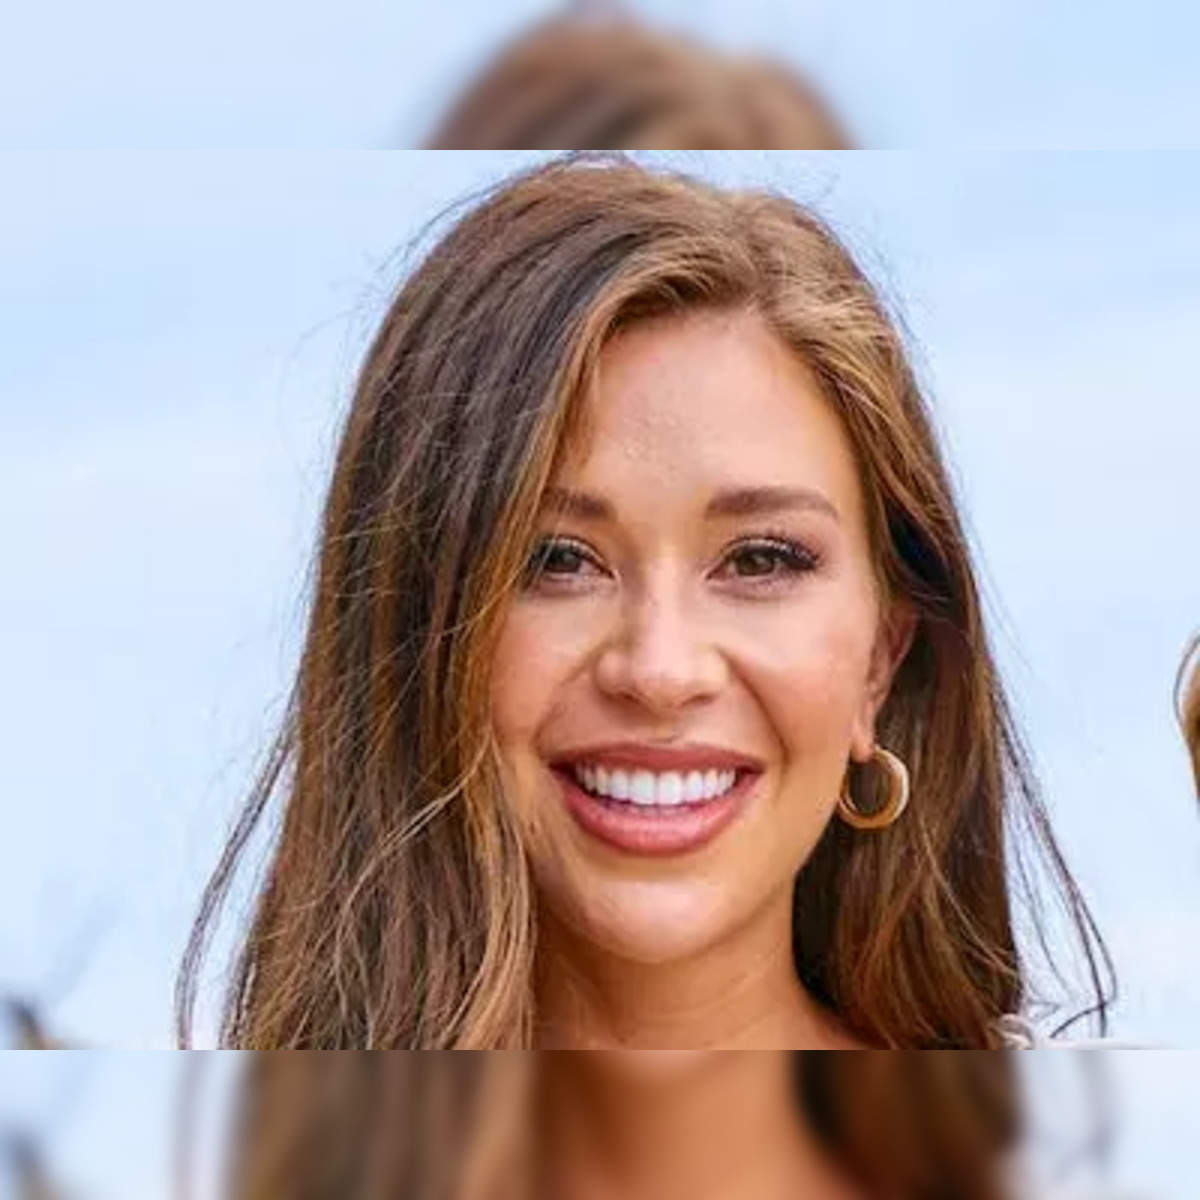 Who Is Gabby Windey? What to Know About Bachelorette 2022